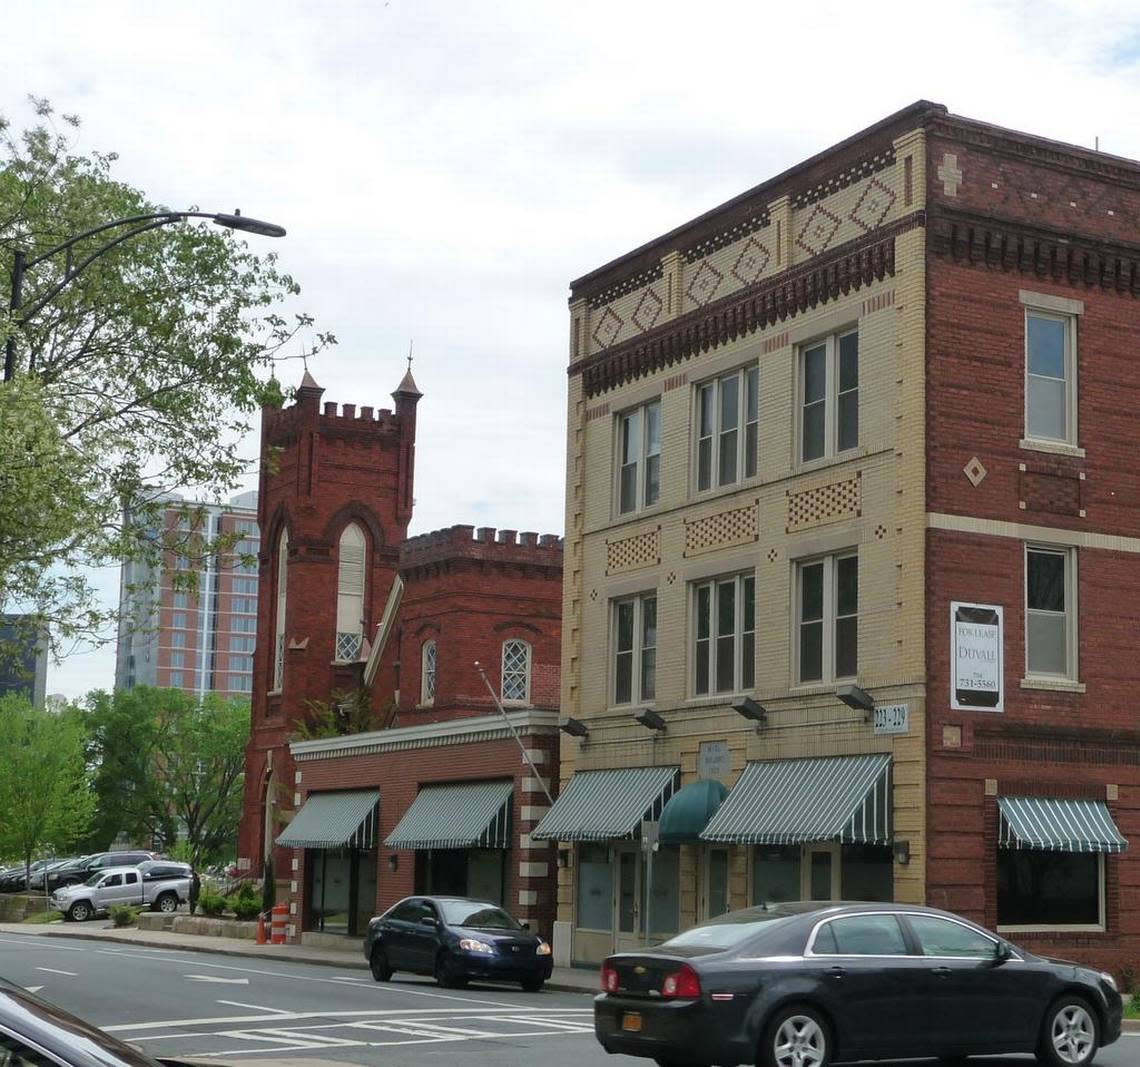 Today you can see a fragment of lost Brooklyn a few blocks away on Brevard Street: the proud brick 1902 Grace AME Zion Church and the 1922 Mecklenburg Investment Company office building for African American professionals. Tom Hanchett